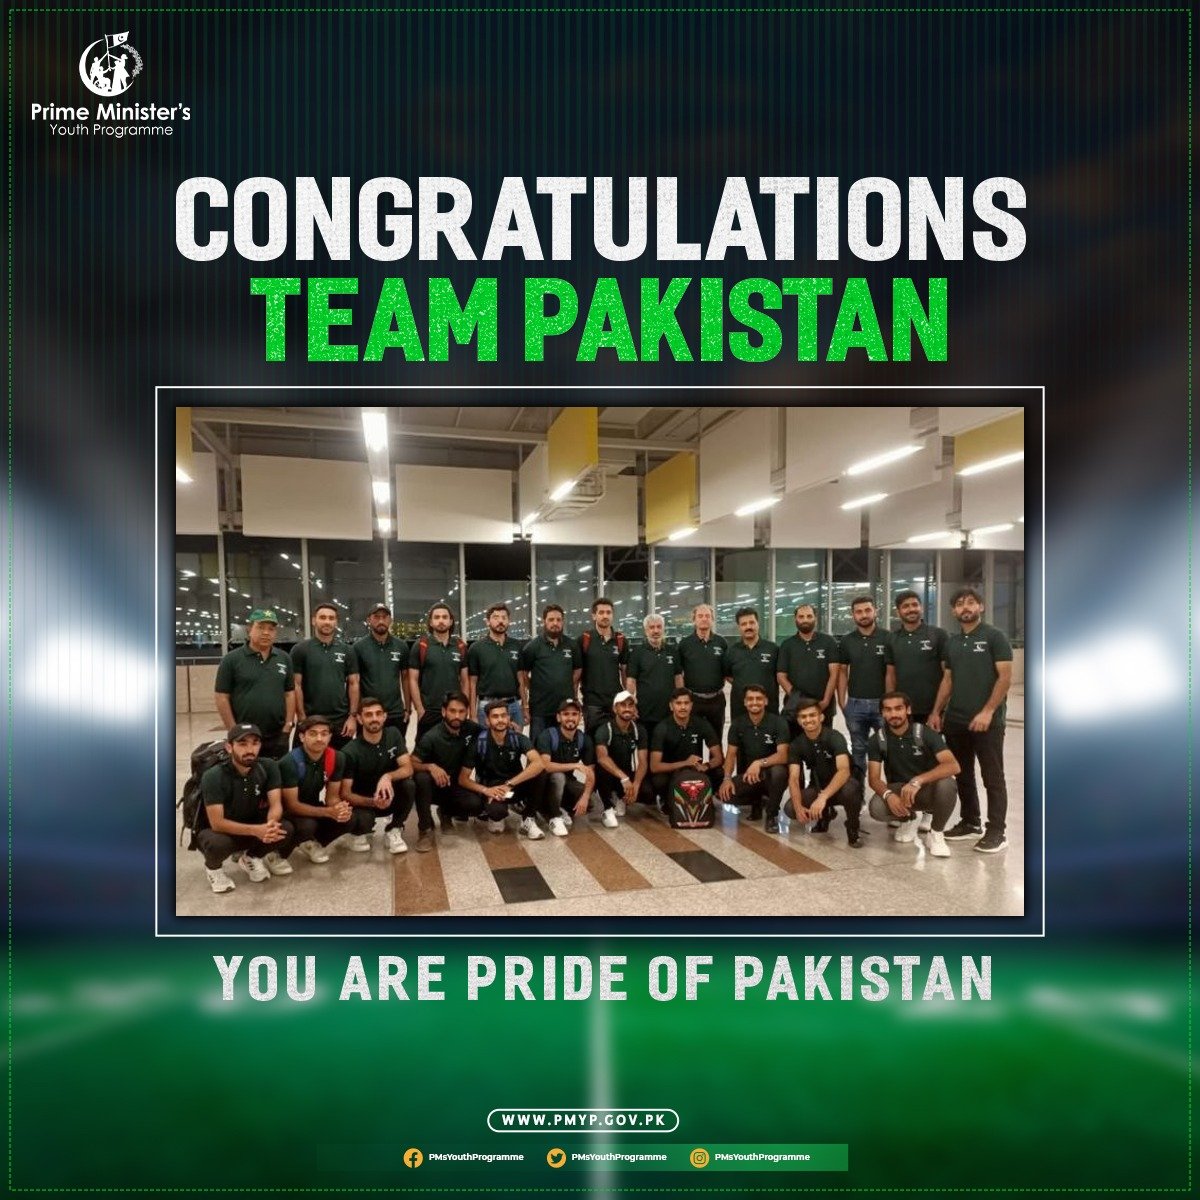 Pakistan's Proud!🇵🇰 Congratulations to 𝗣𝗮𝗸𝗶𝘀𝘁𝗮𝗻 𝗛𝗼𝗰𝗸𝗲𝘆 𝗧𝗲𝗮𝗺🏑 on thrilling 𝟱-𝟰 𝘄𝗶𝗻 against Malaysia in #Azlan_Shah_Championship A special shoutout to Chairman @ranamashhood for his tireless efforts in bringing team together & making this moment possible.